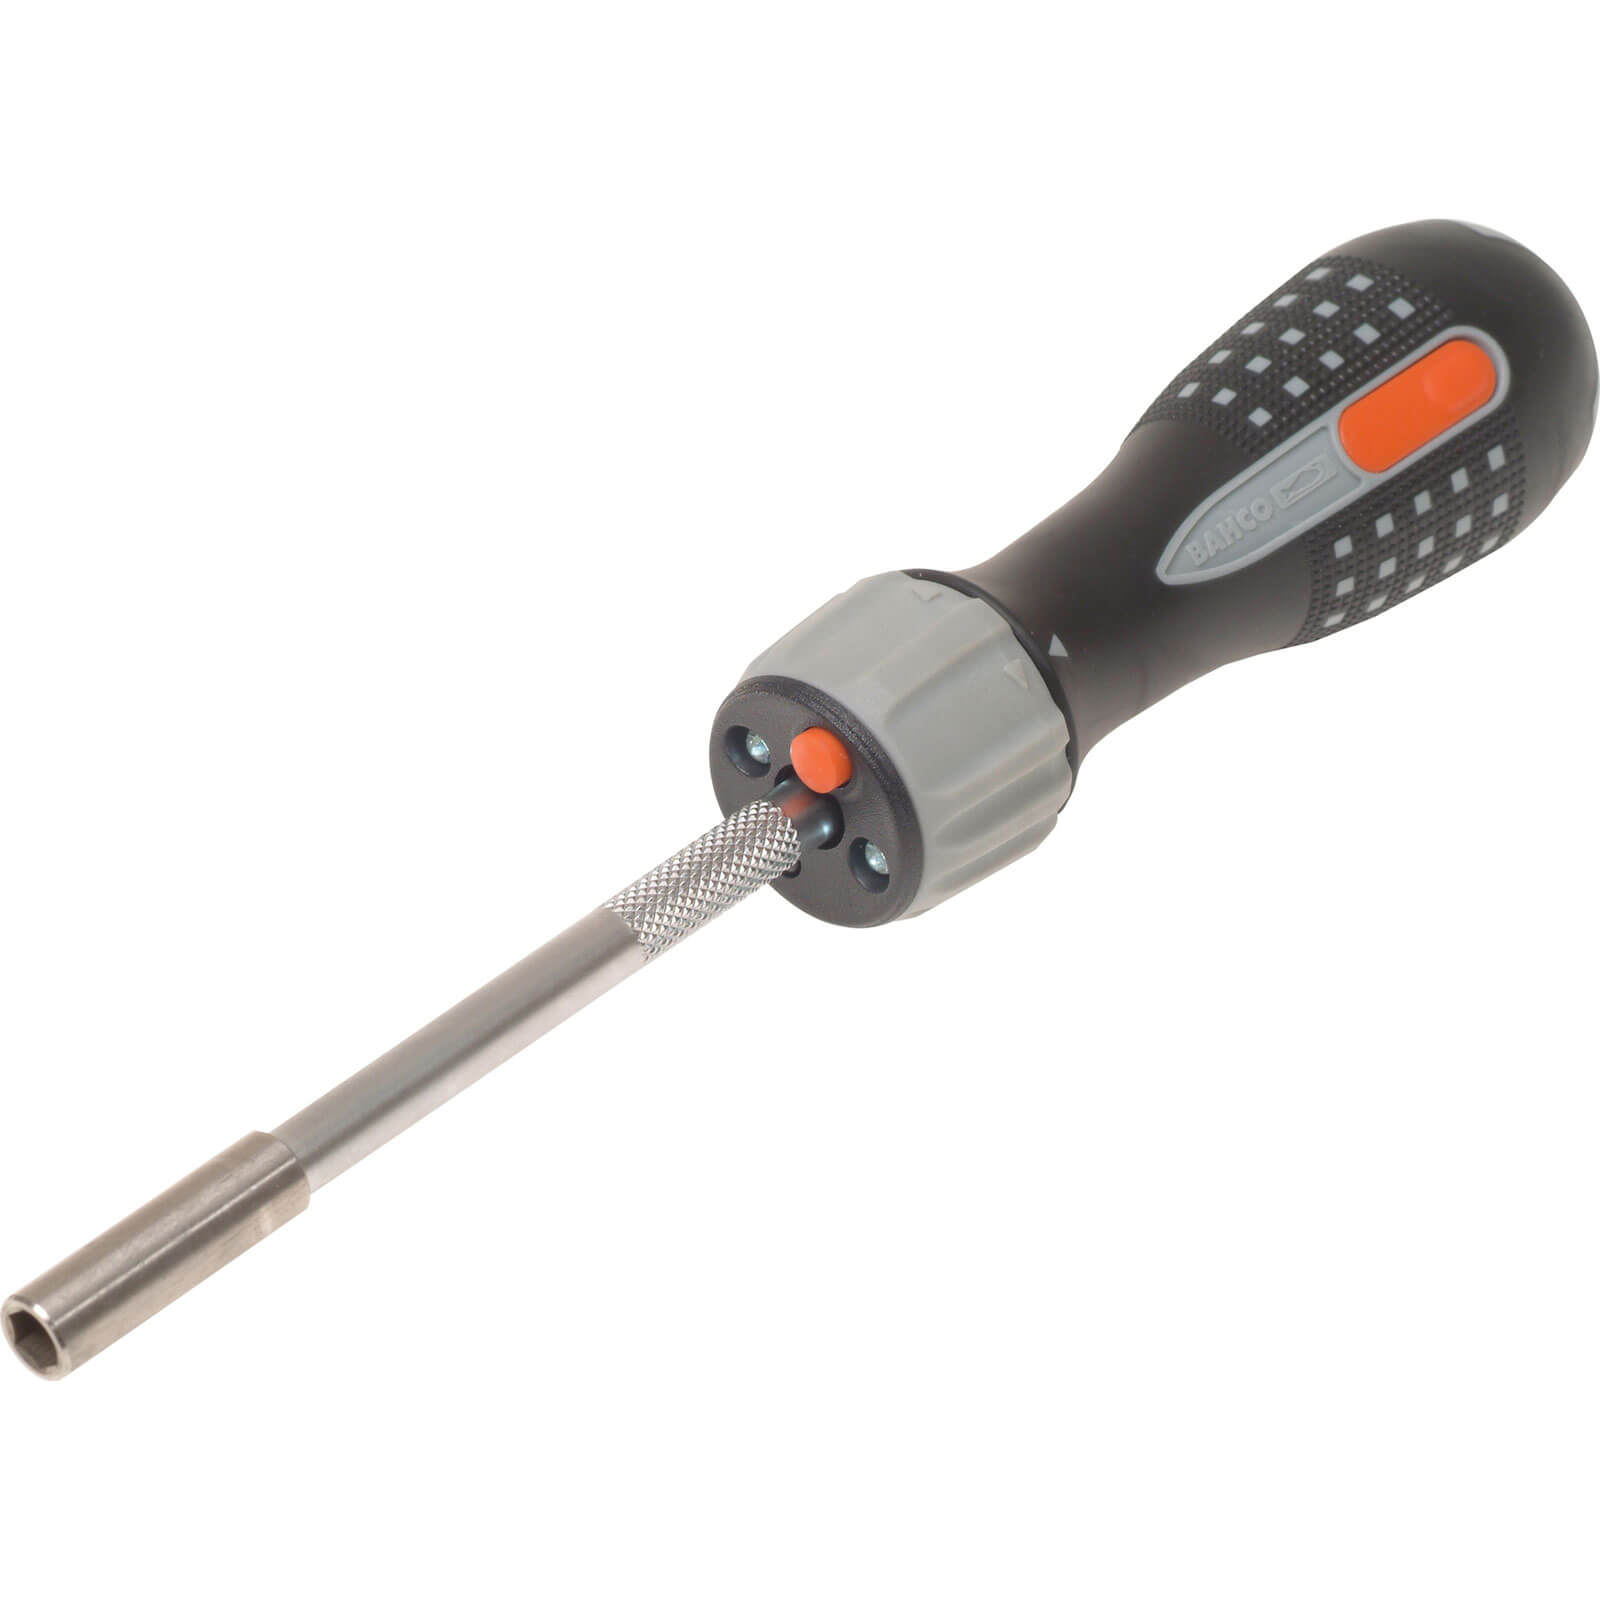 Photo of Bahco 6 Piece Led Ratchet Screwdriver